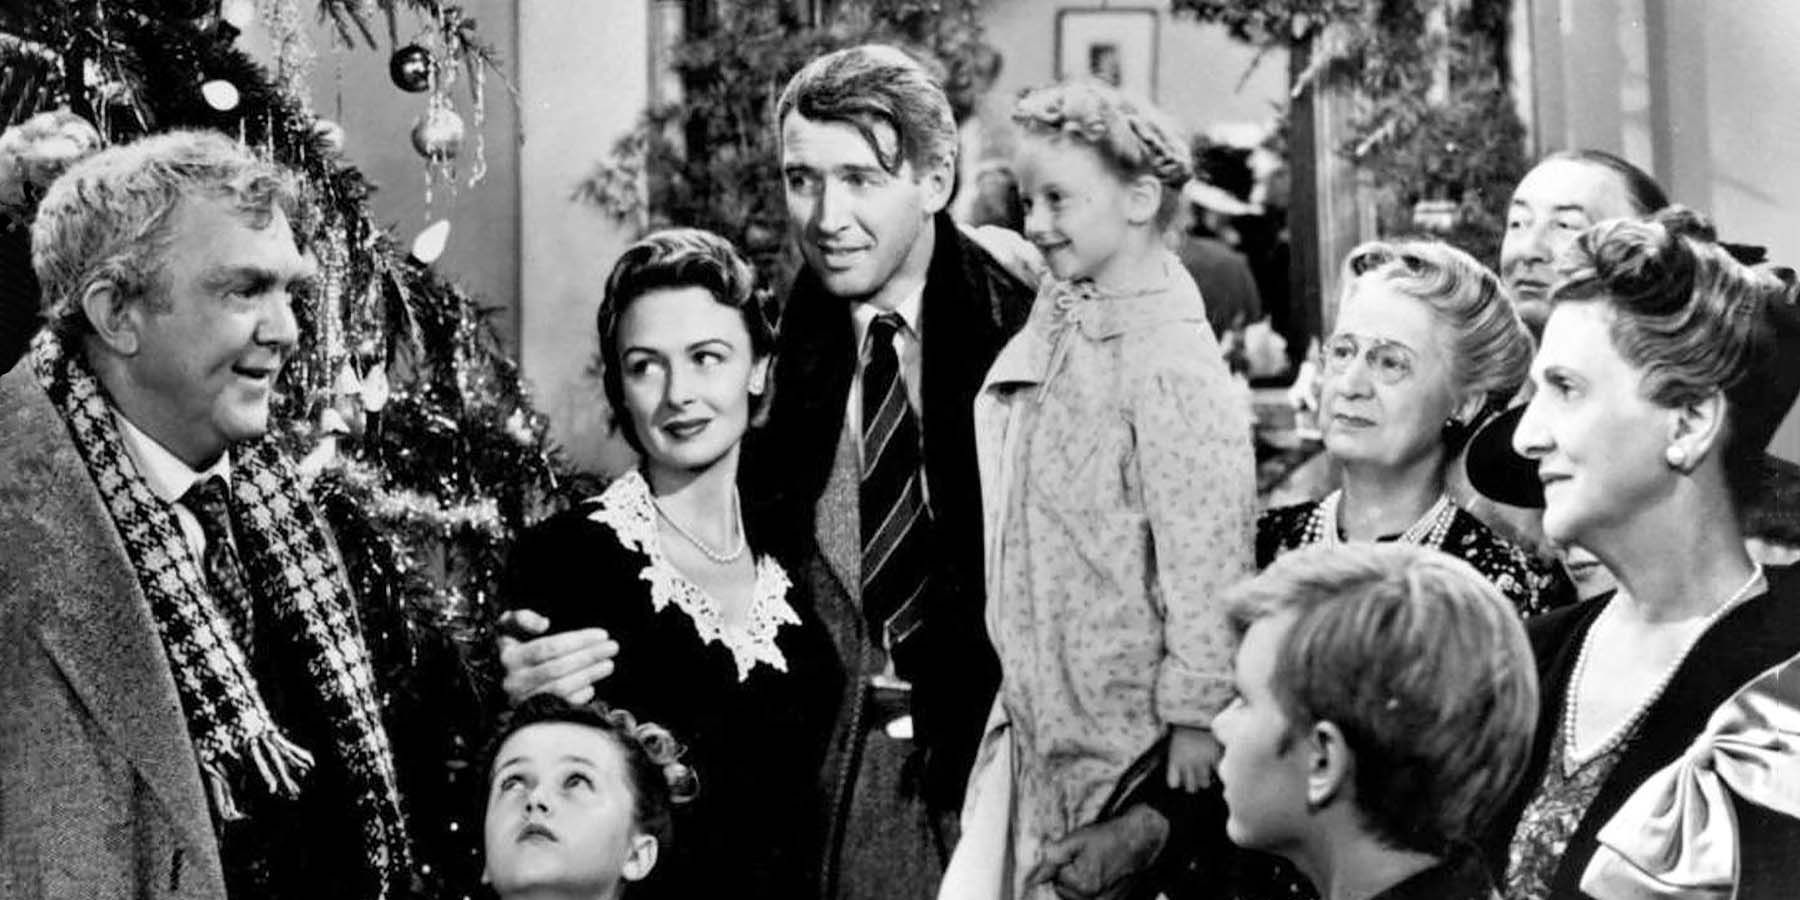 It's A Wonderful Life family